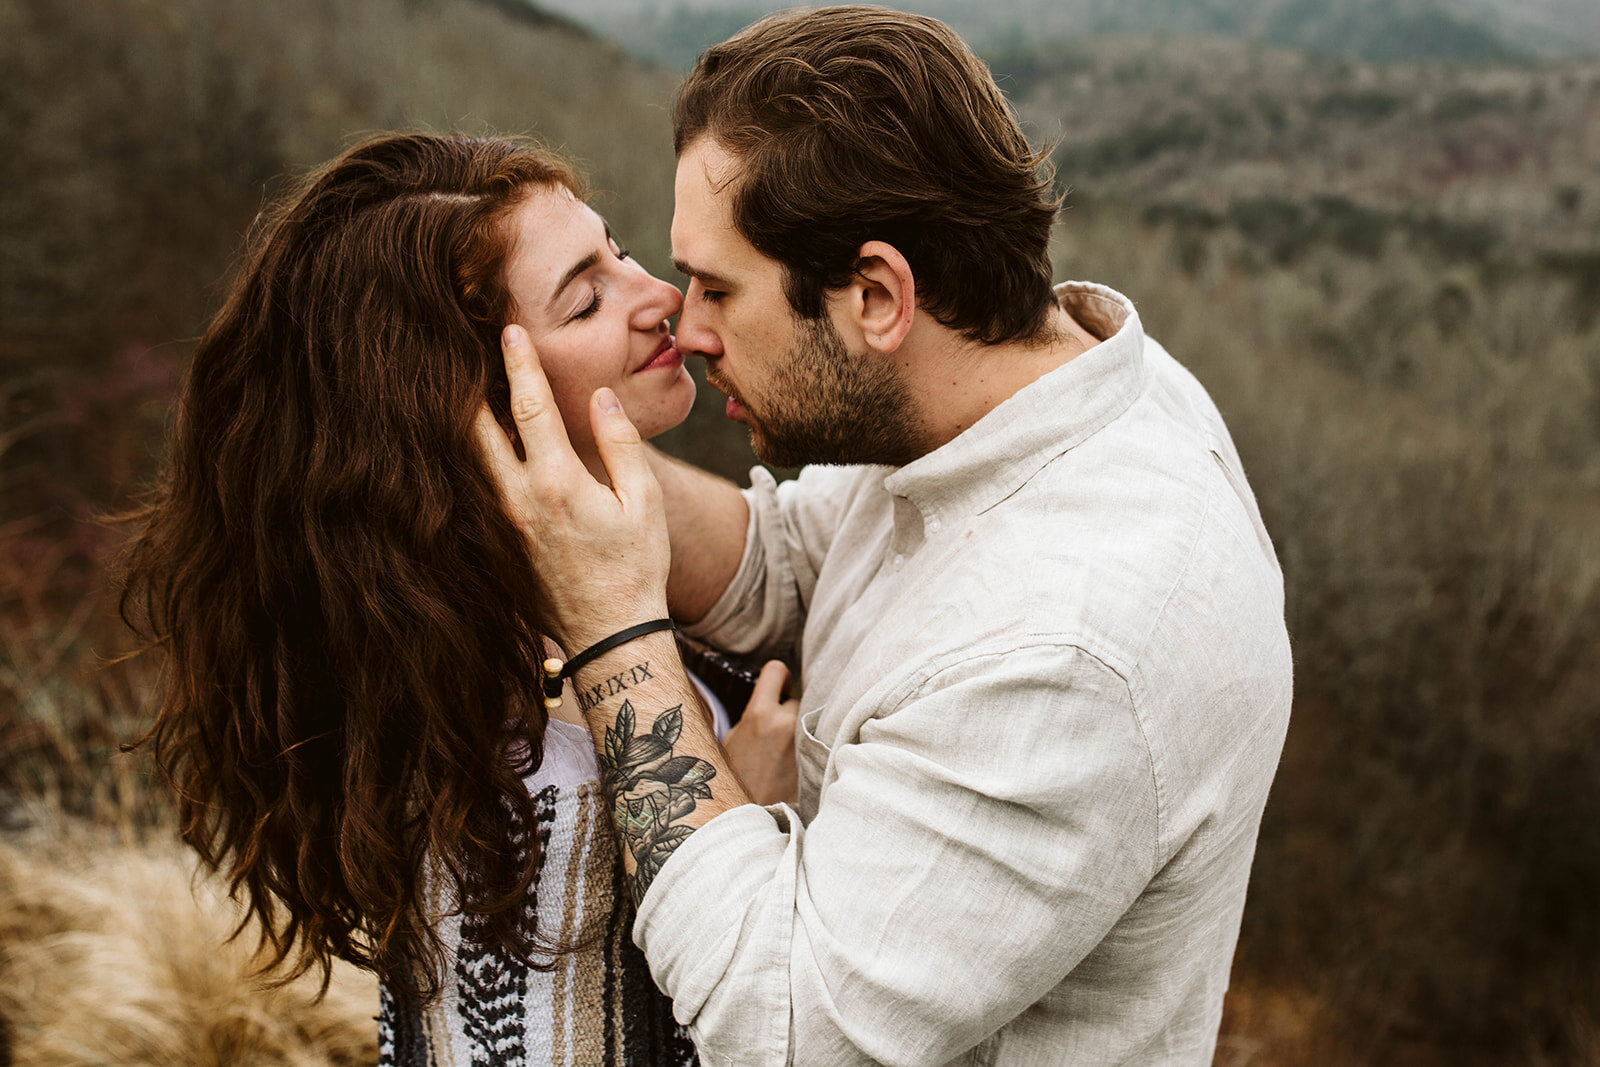 adventure-engagement-in-the-great-smoky-mountains-chattanooga-elopement-photographer5Y6A5724_websize.jpg